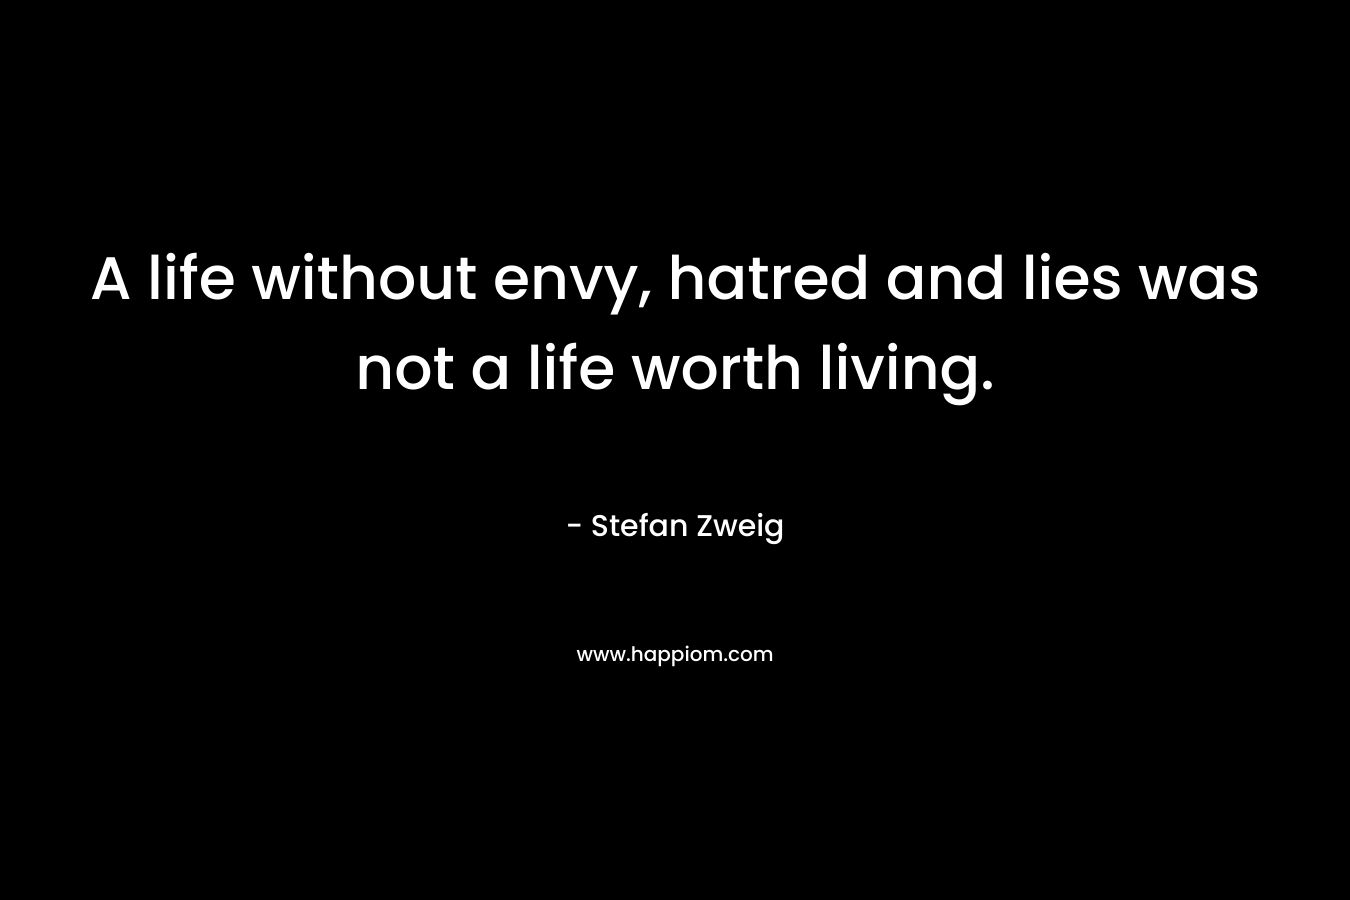 A life without envy, hatred and lies was not a life worth living. – Stefan Zweig